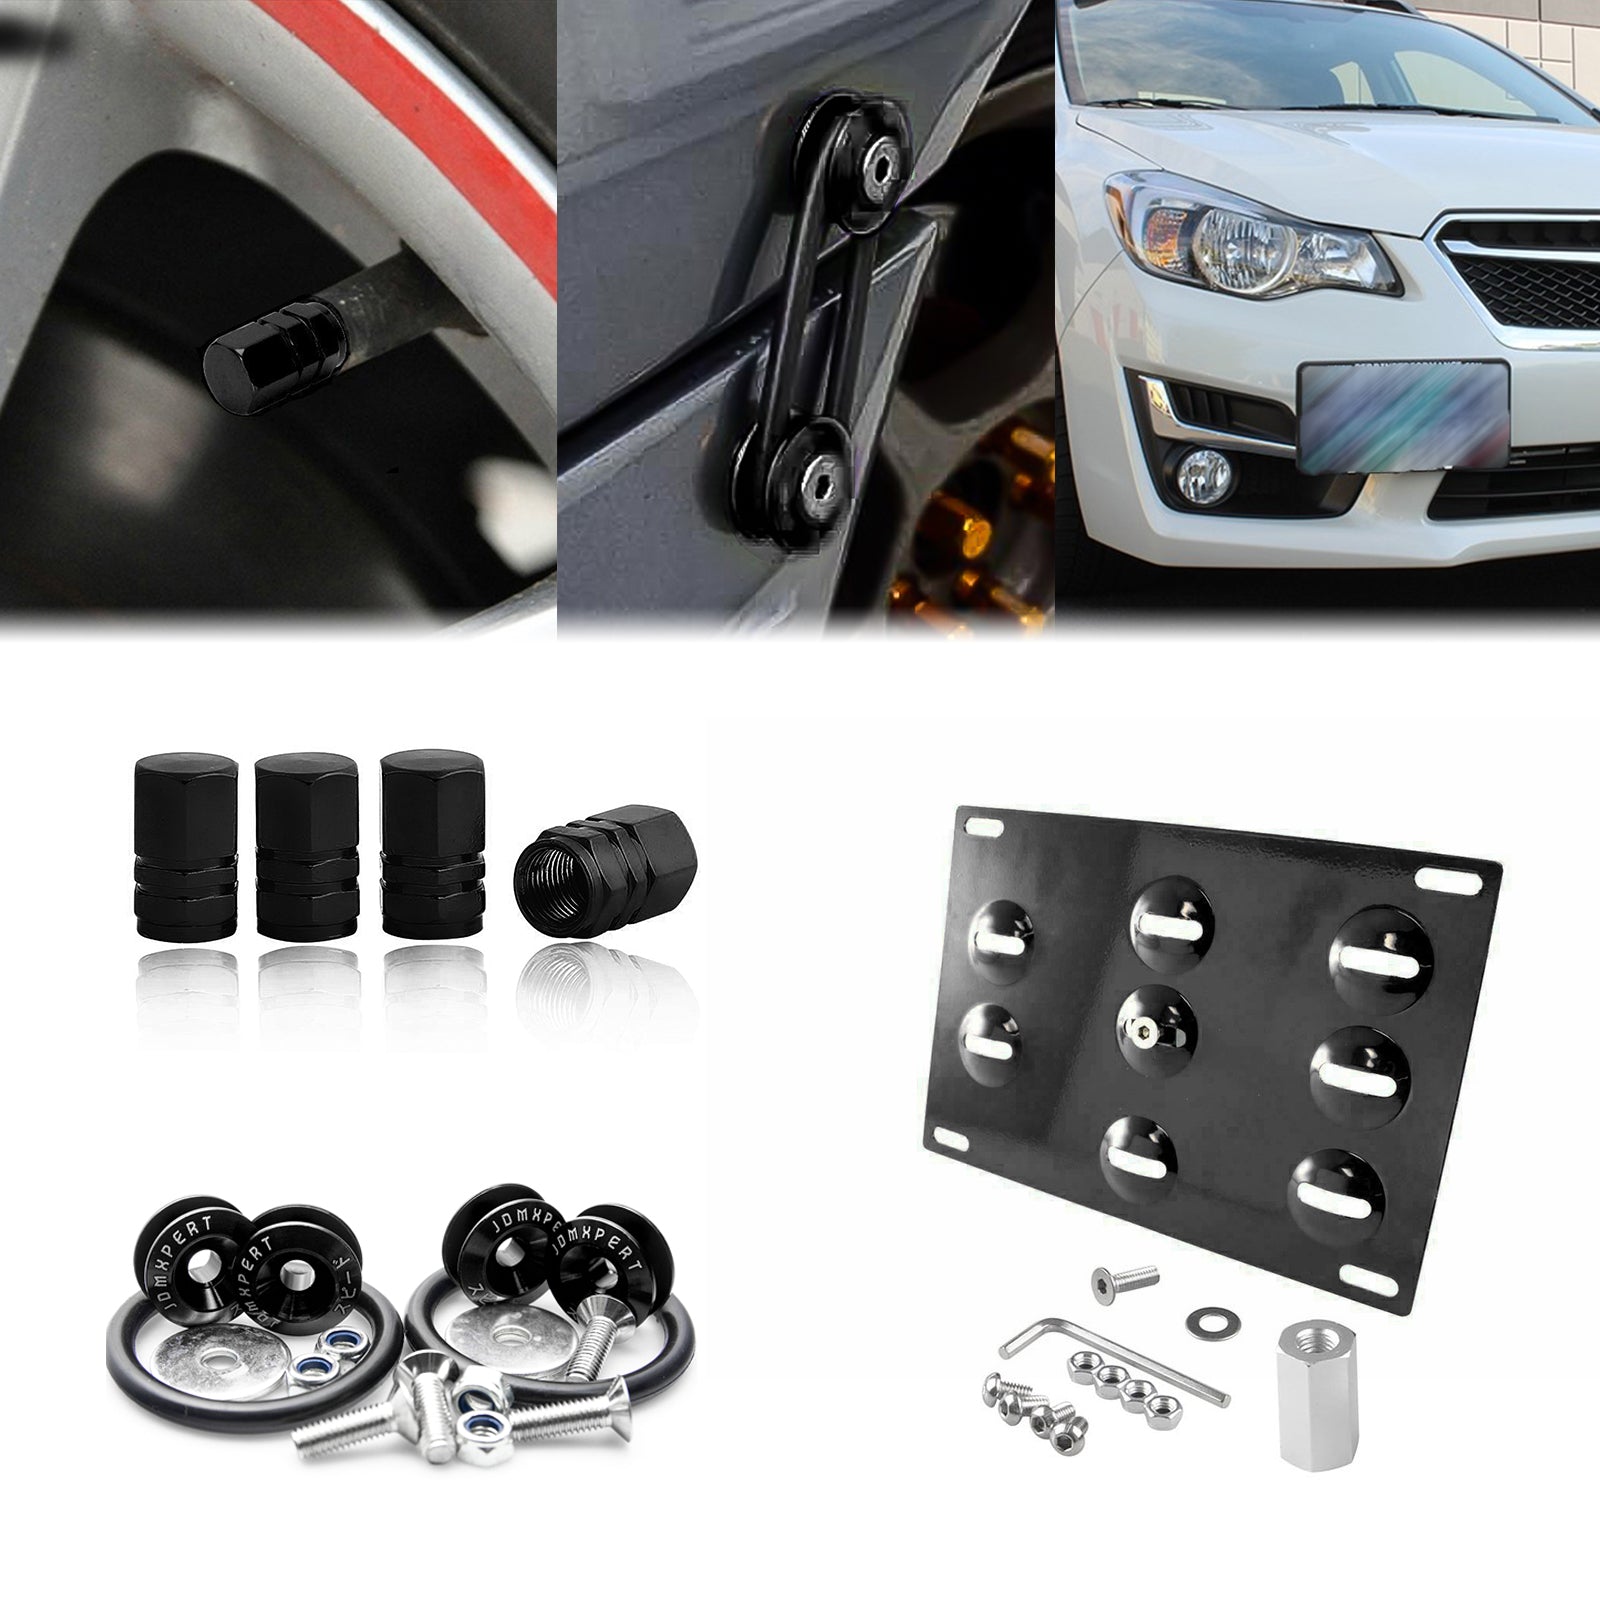 Front Bumper Tow Hook License Plate Mount Bracket for Subaru WRX STI, Plate  Holder Set w Unique Screw Bolts & Black Screw Caps, License Tag Mounting